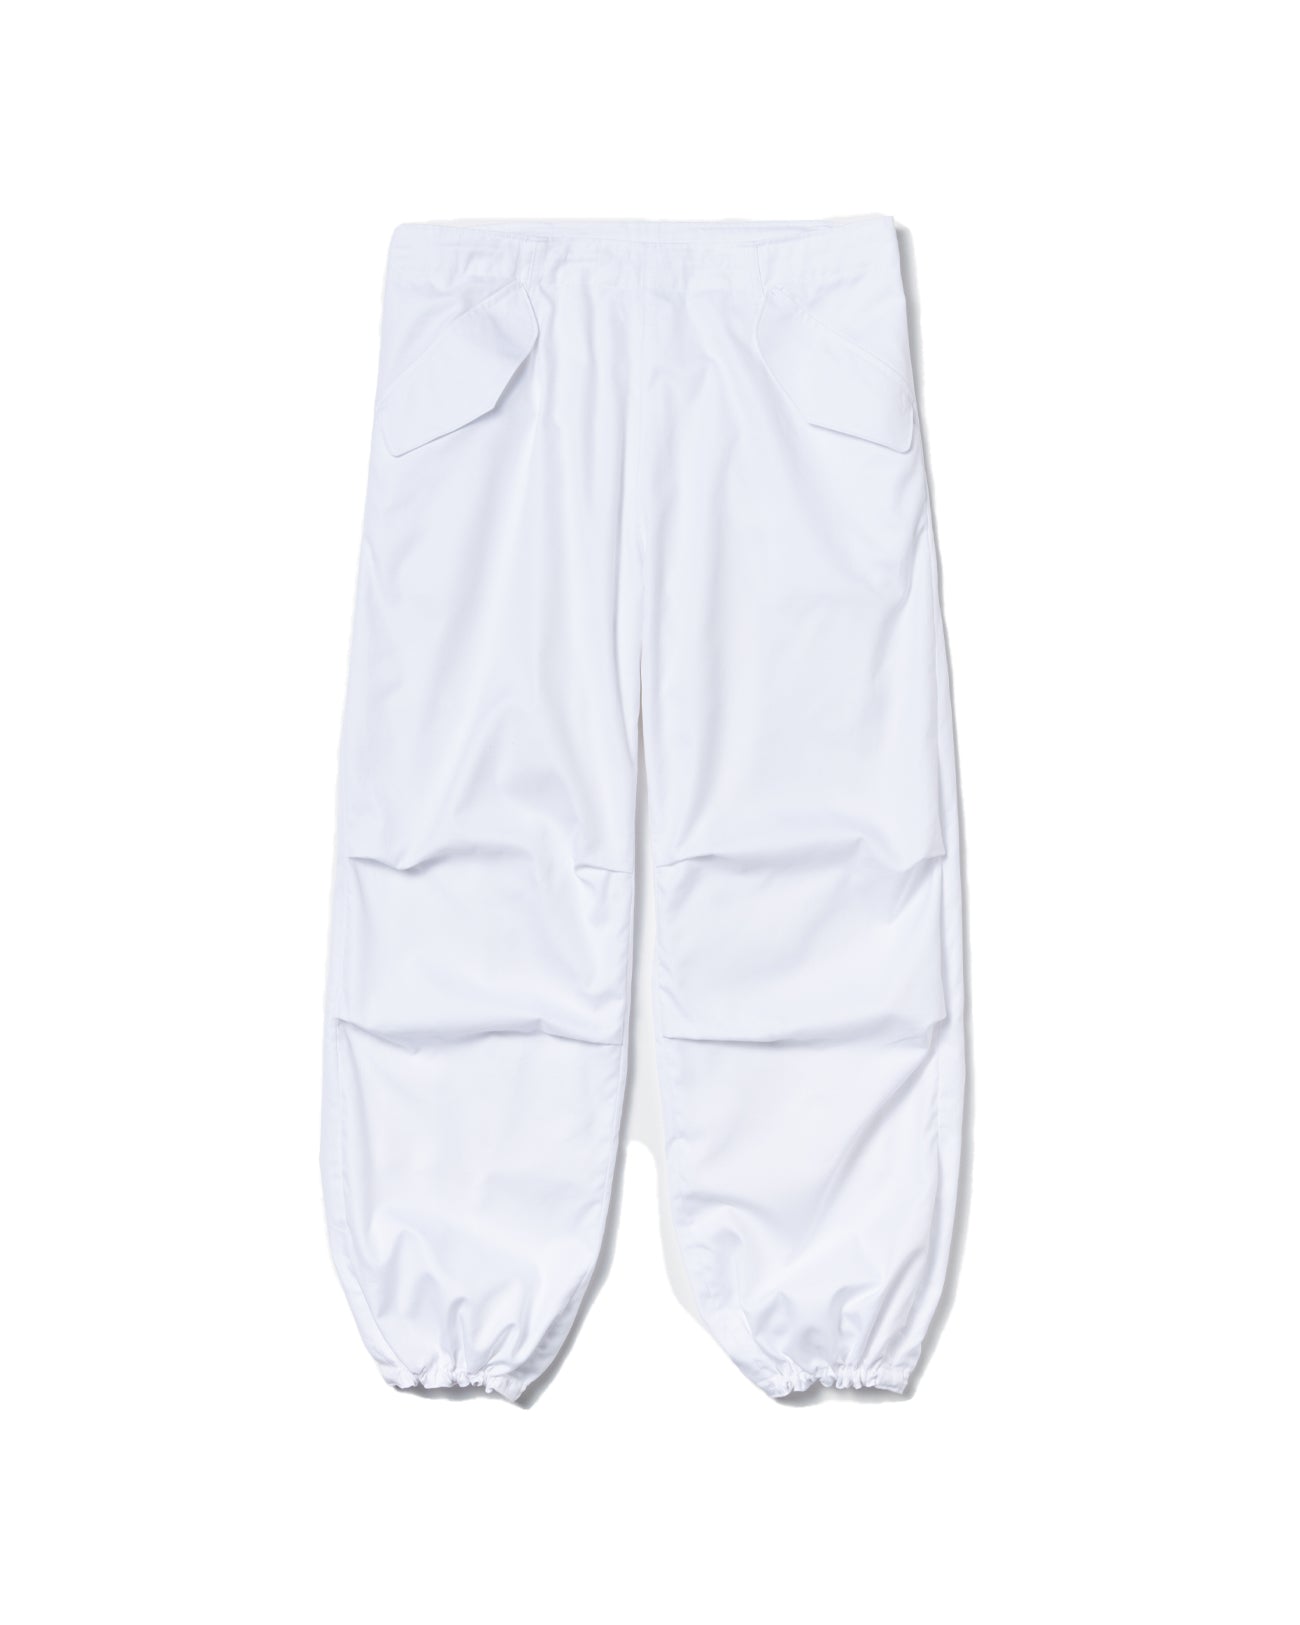 Finx OX New M65 Trousers - white - FAB4 ONLINE STORE